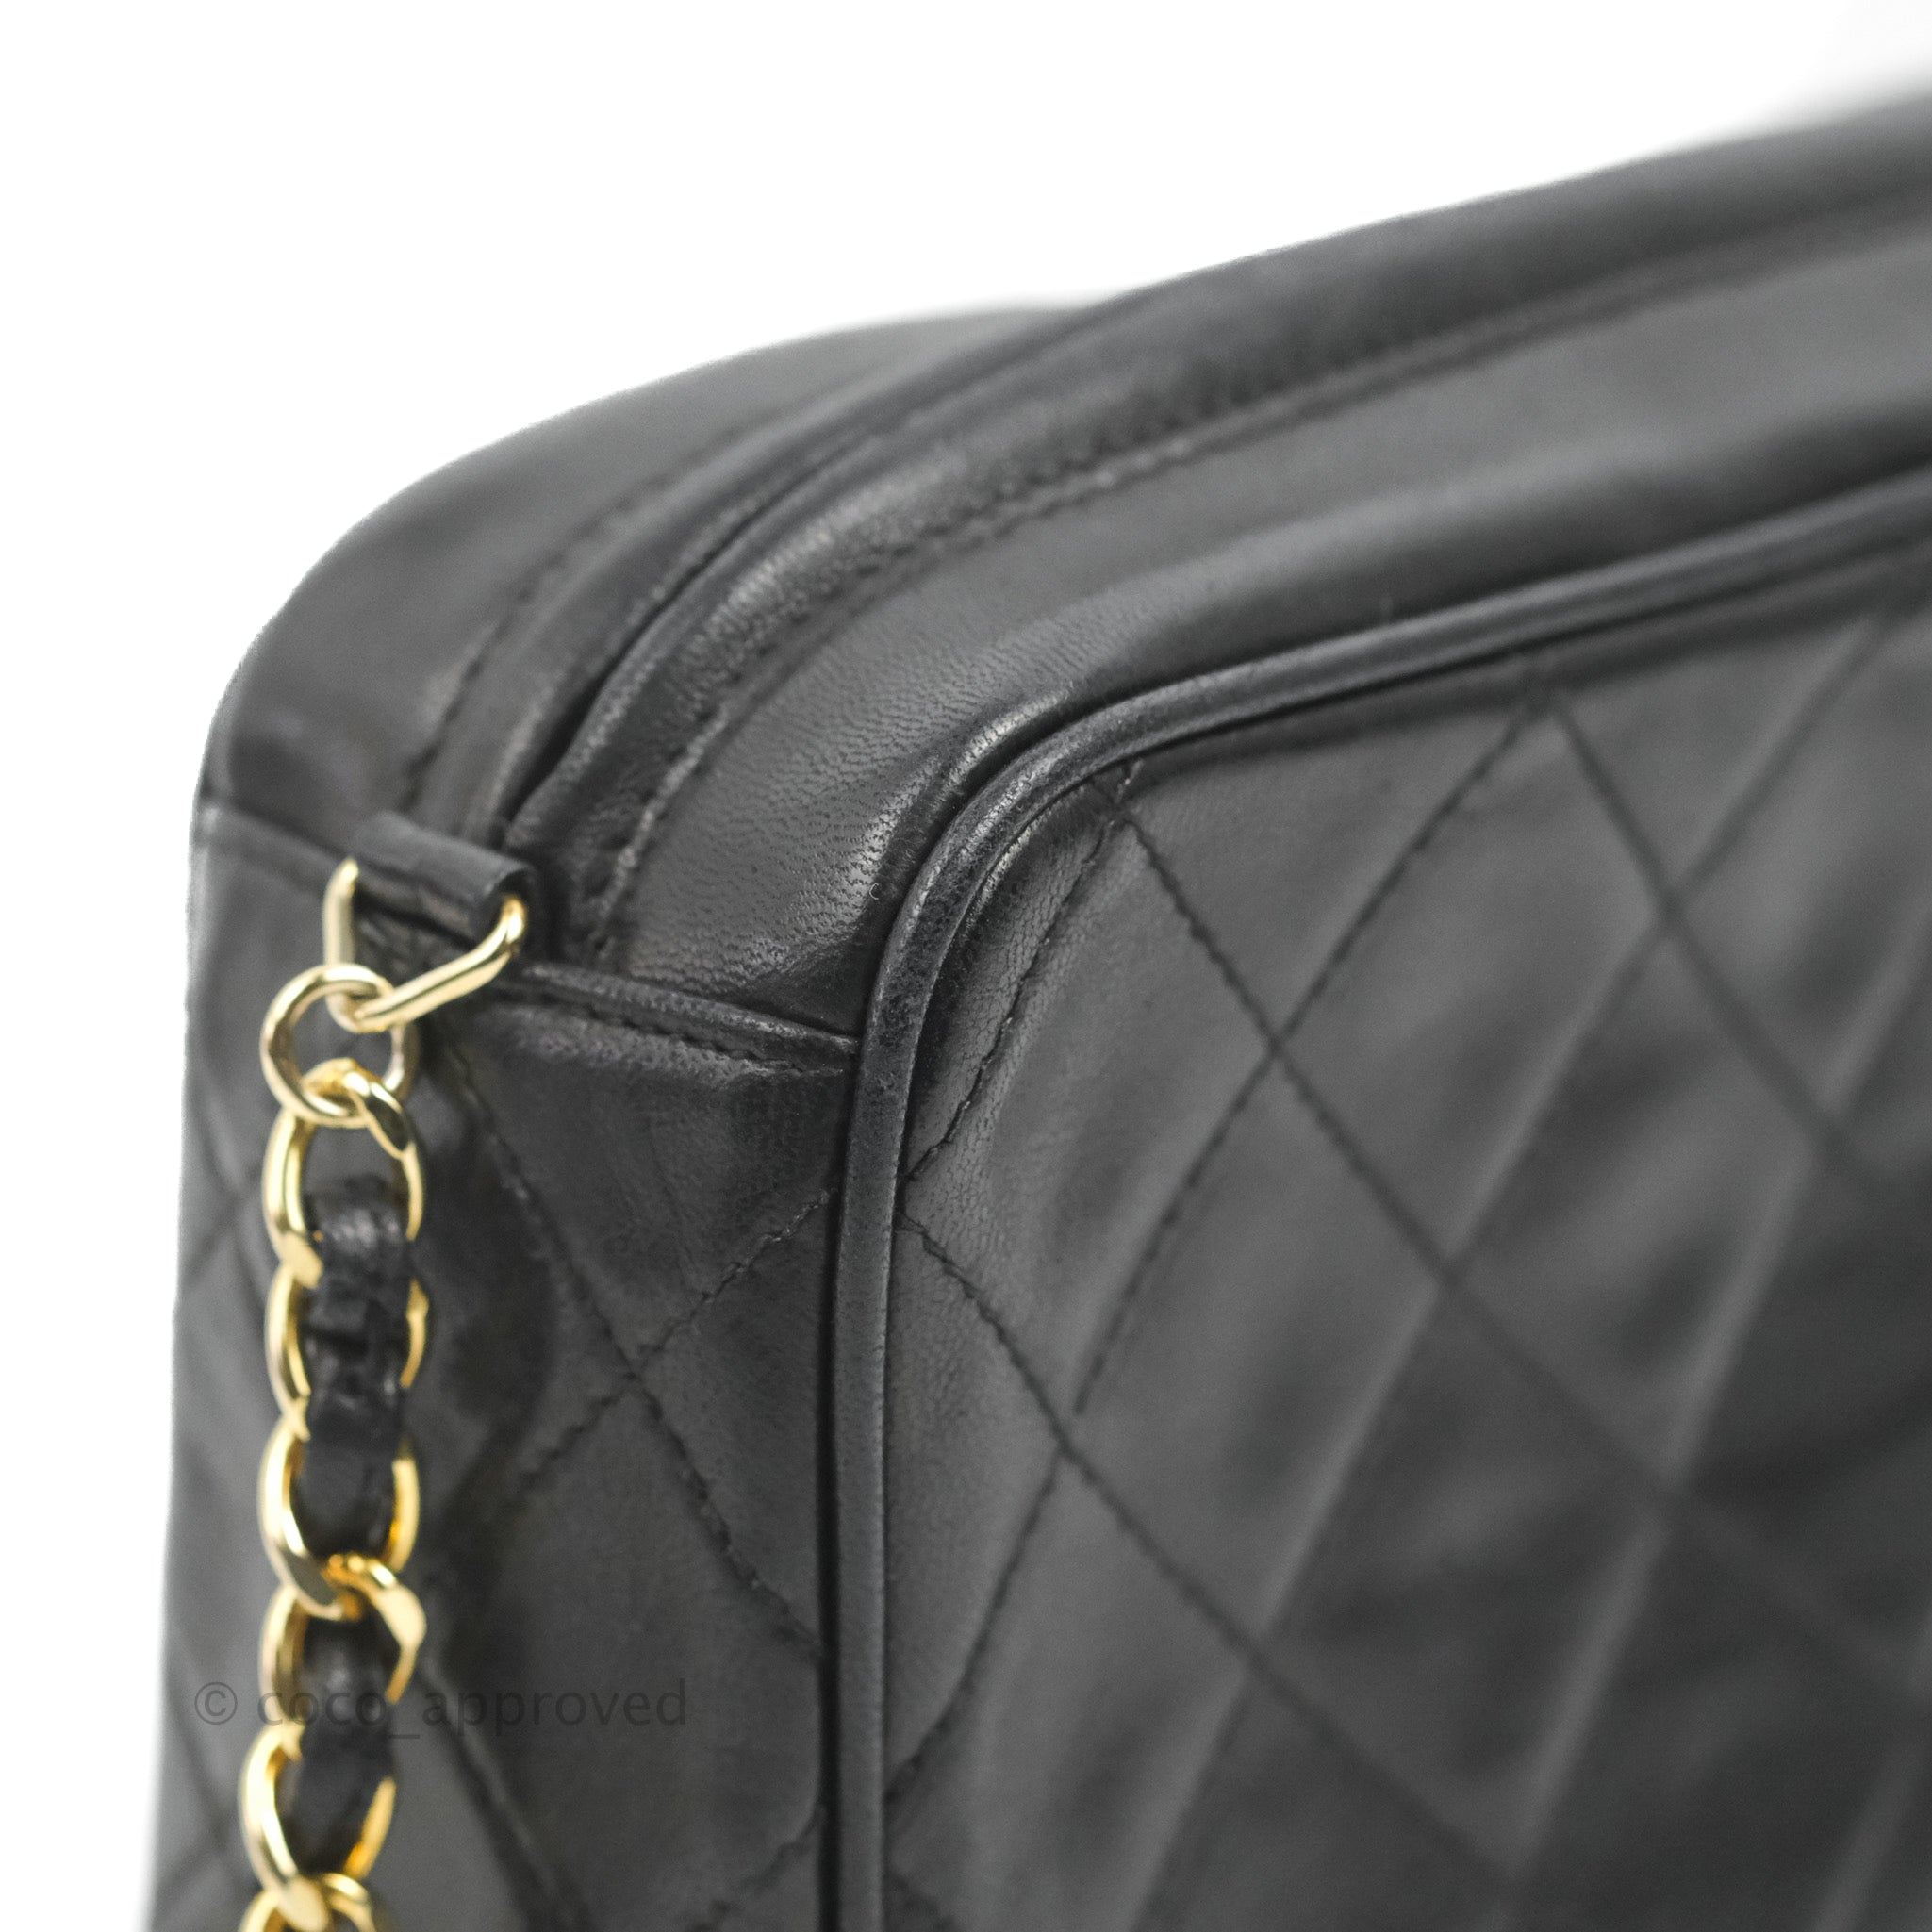 Chanel Vintage Small Camera Bag Black Lambskin Gold Hardware – Coco  Approved Studio